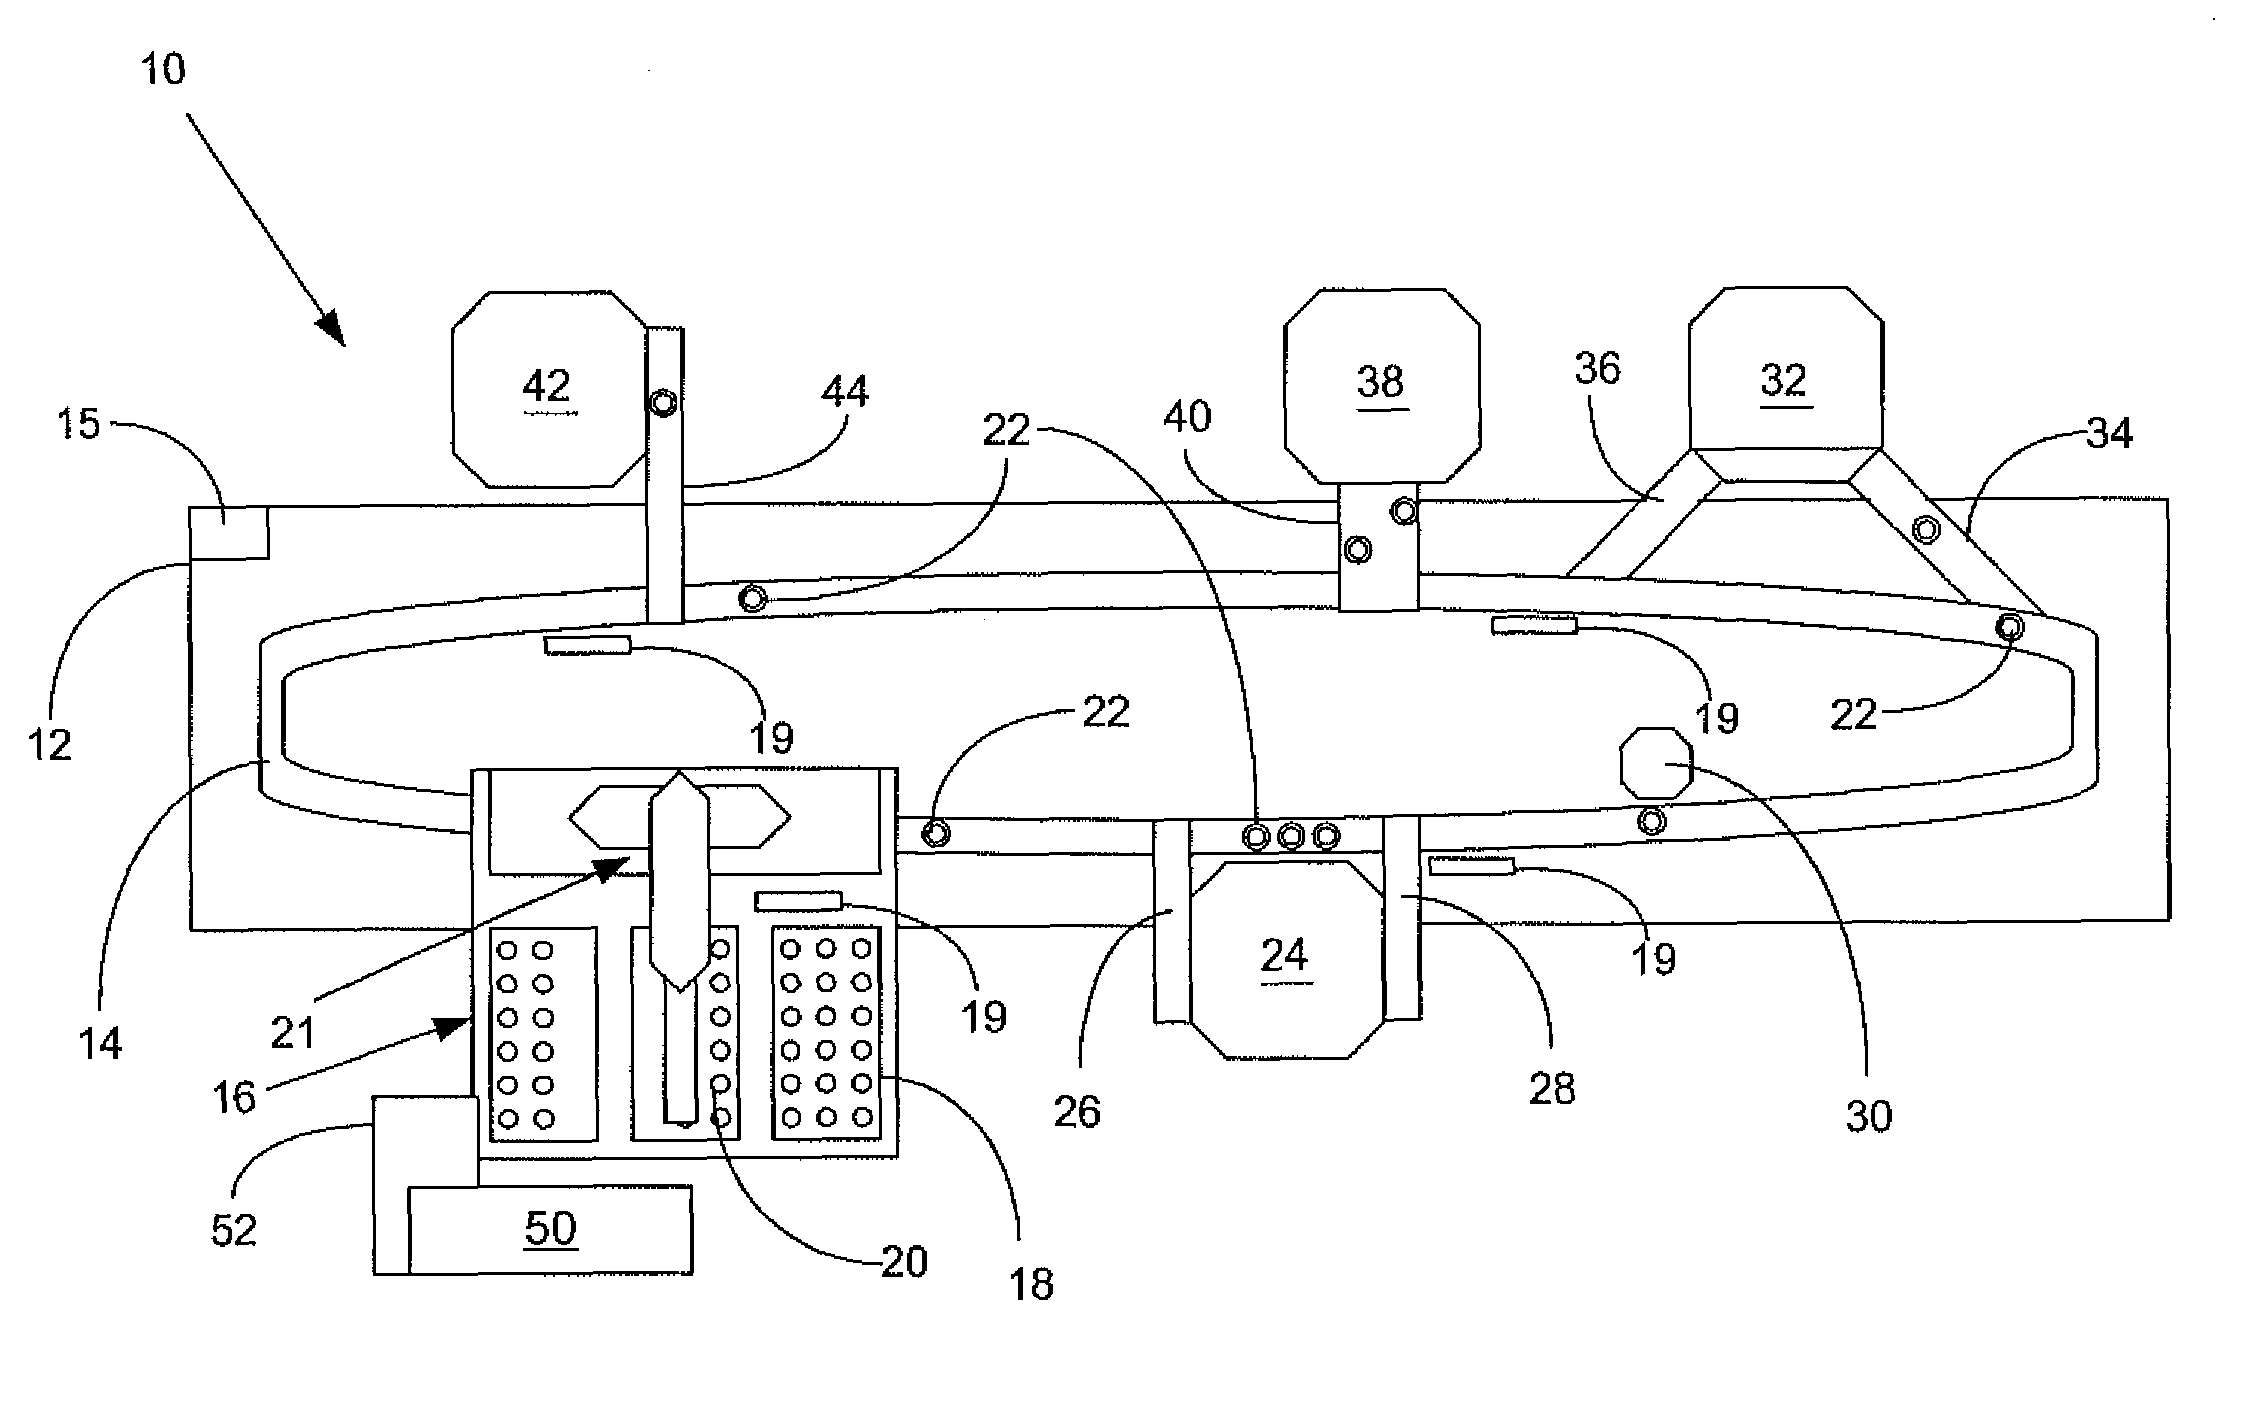 Mobile sample storage and retrieval unit for a laboratory automated sample handling worksystem